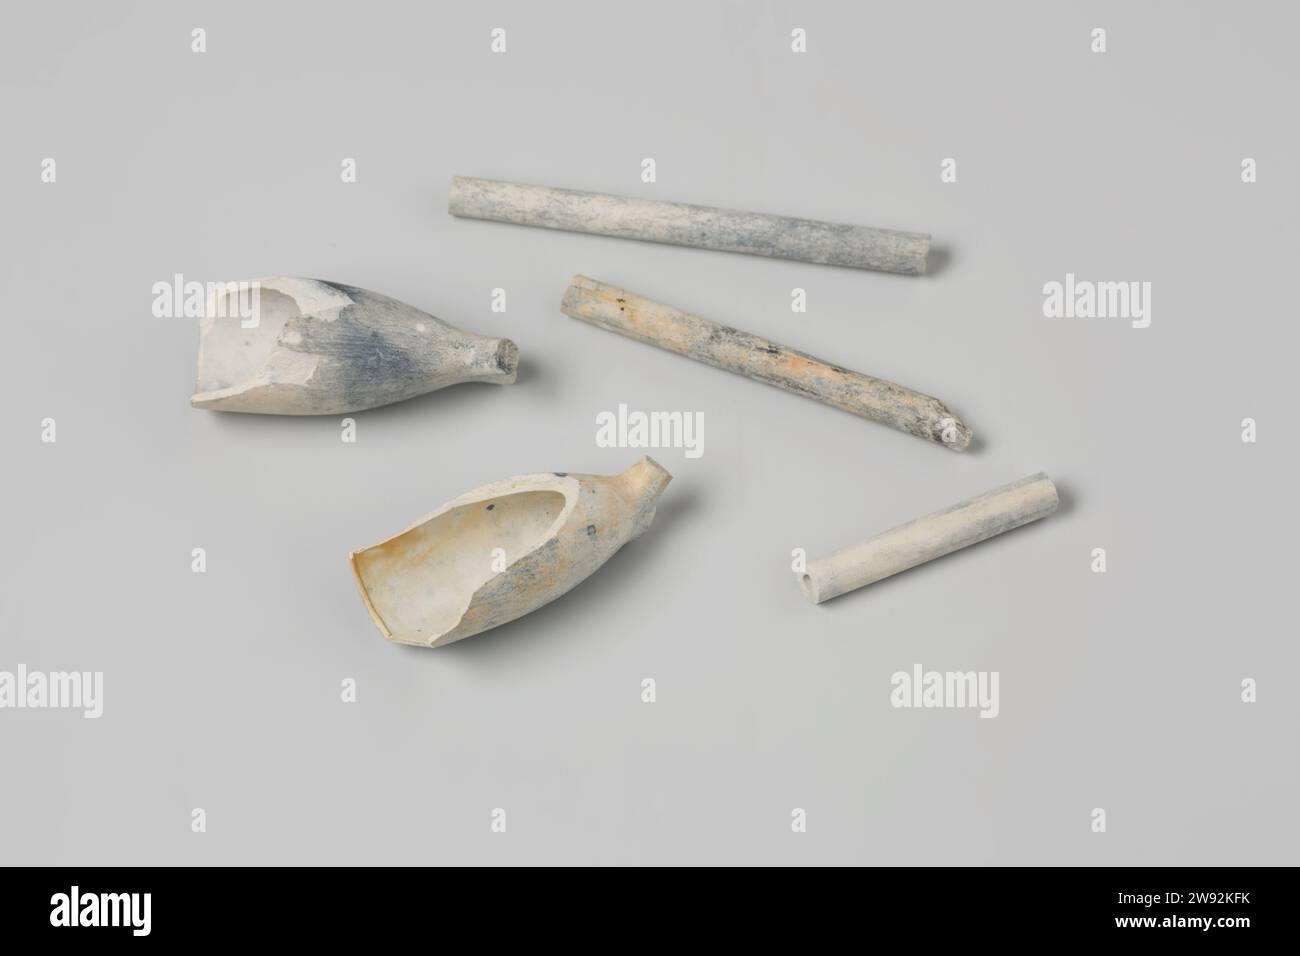 Fragments of pipes and pipe heads from the wreck of the East Indians' t Vliegend Hart, WS, 1700 - 1735  Two broken heads from an earthen Goudse Pijp, heel brand WS. Three pieces of stem. Everything blue and white. Fragments of Bowls and Stems. Gouda pipe clay Stock Photo